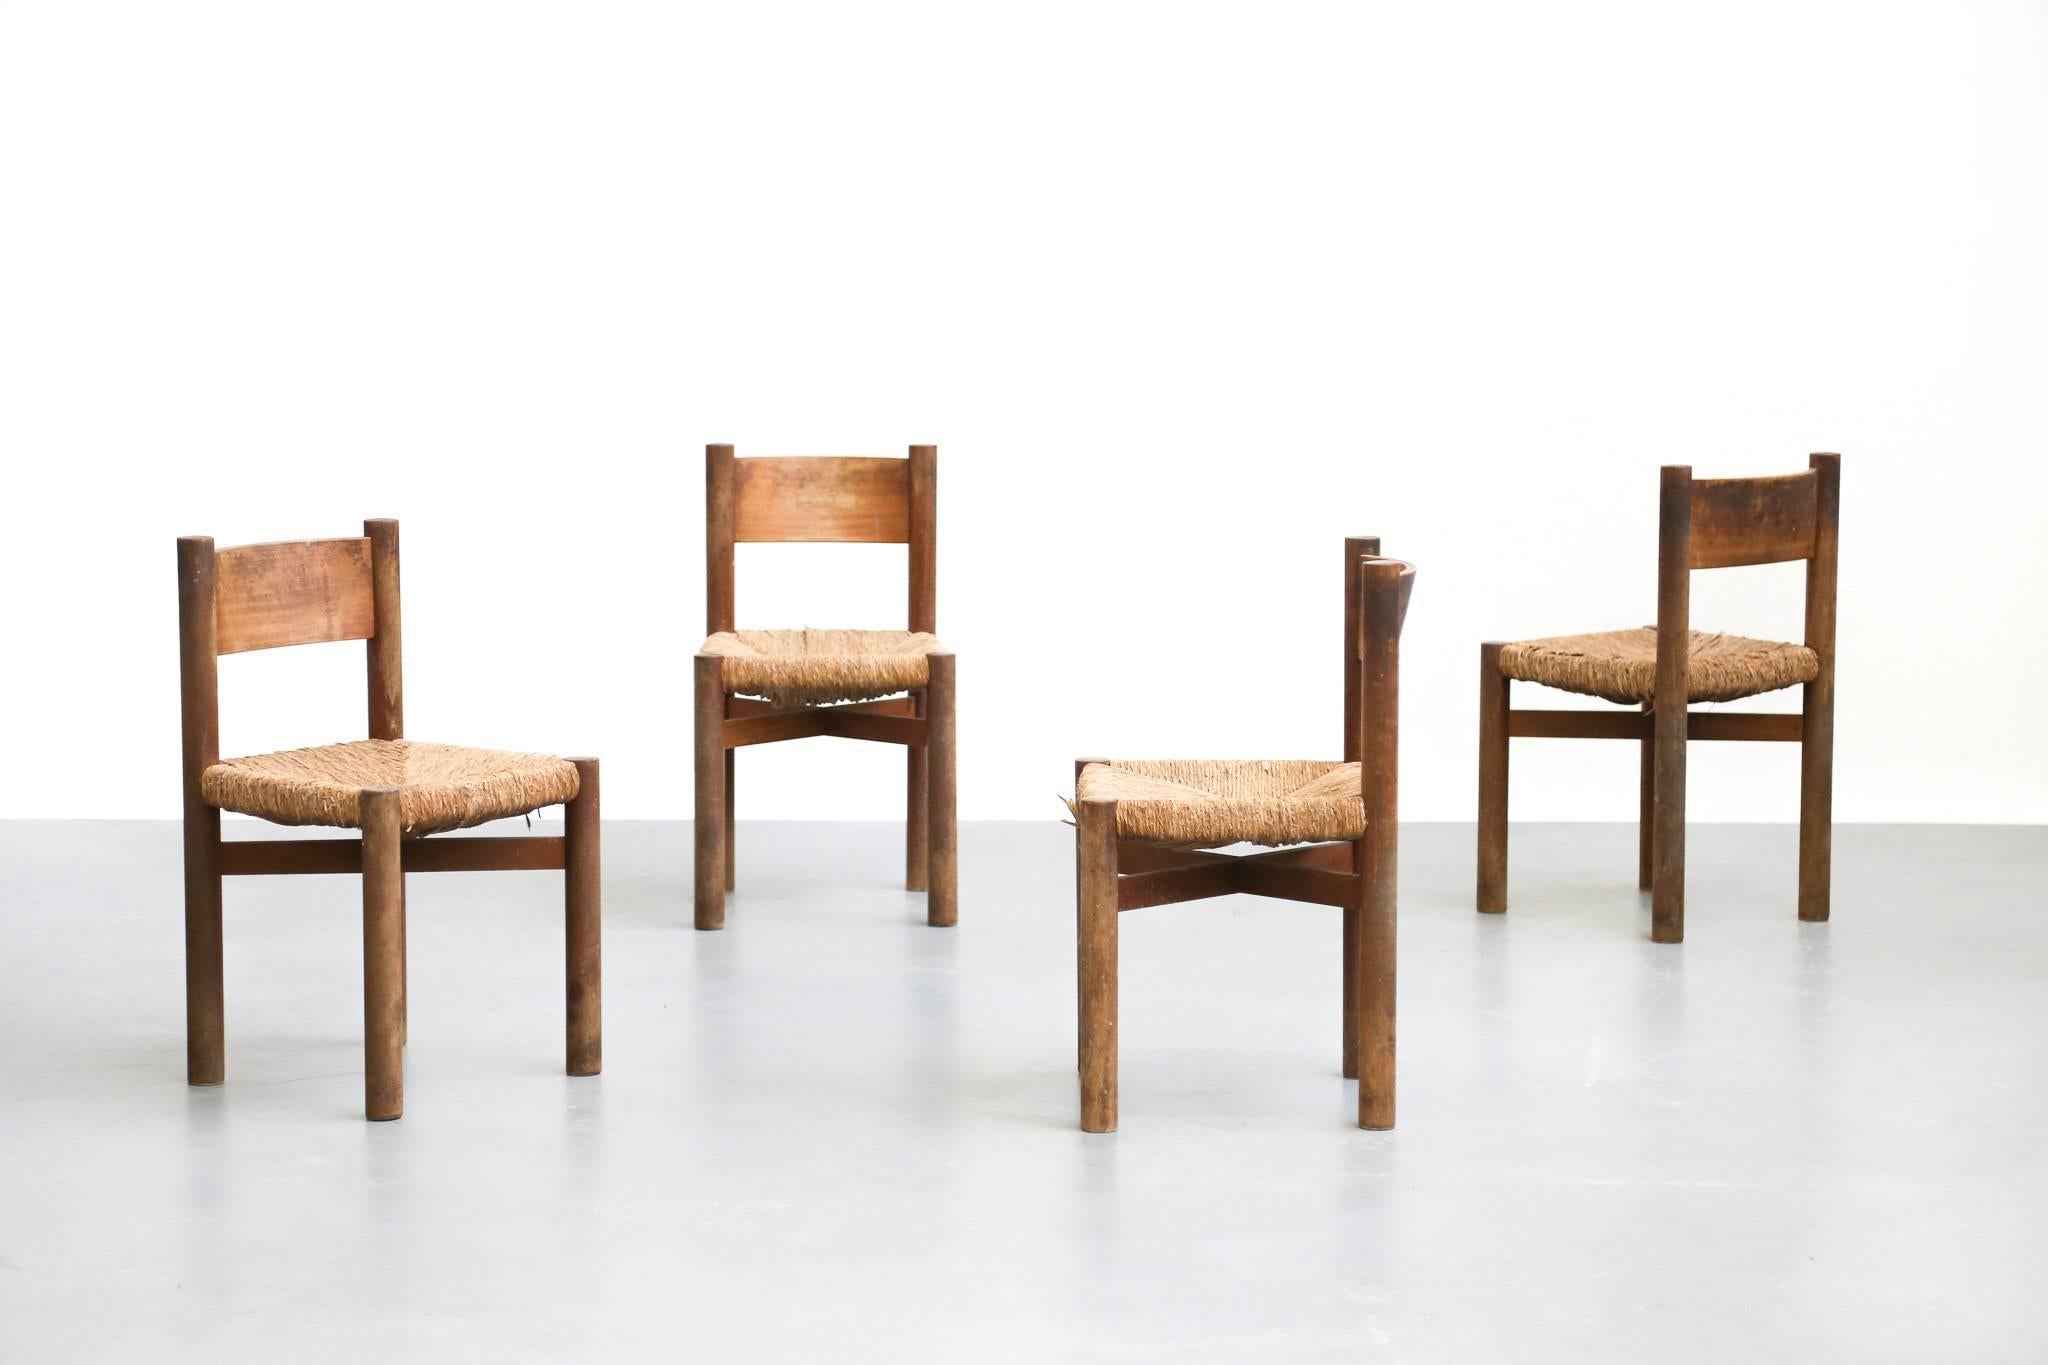 Rare set of four chair designed by the designer and architect Charlotte Perriand
This set was made for Meribel apartment in the 1950s
Made of wood and straw, preserving a beautiful patina.

Restoration on request!
 